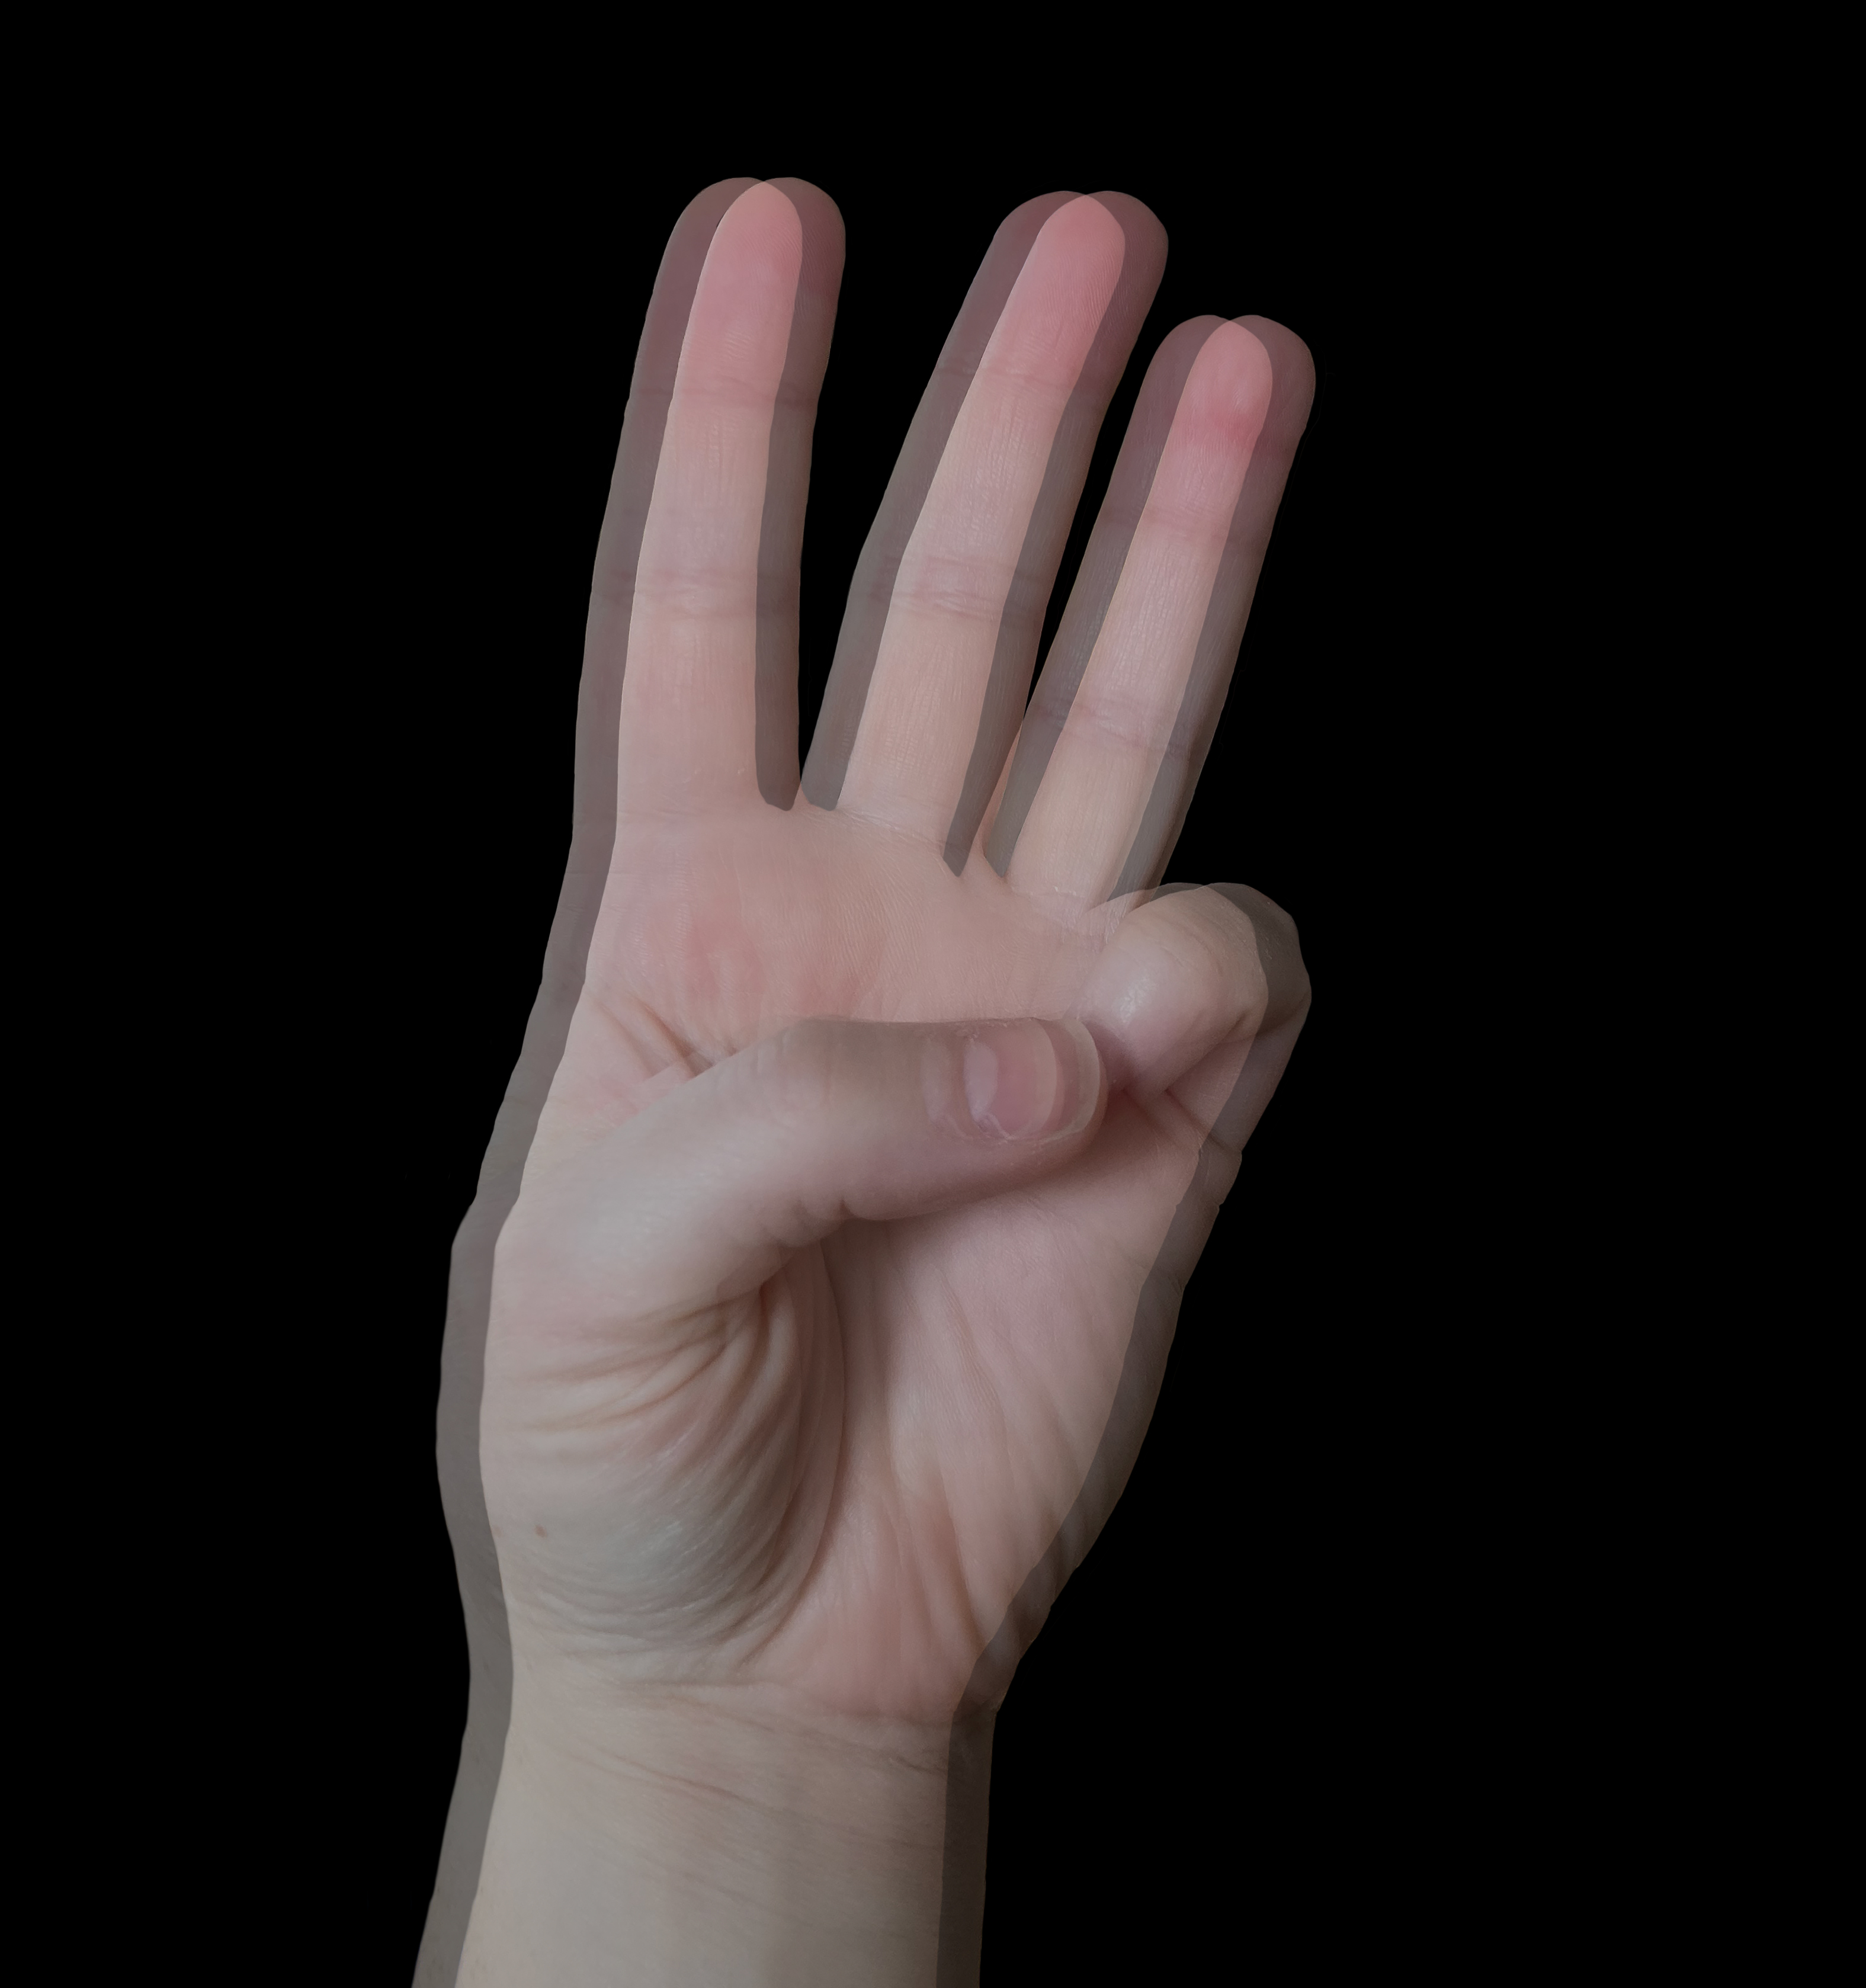 Diplopia. Image of blurred hand illustrating double vision.